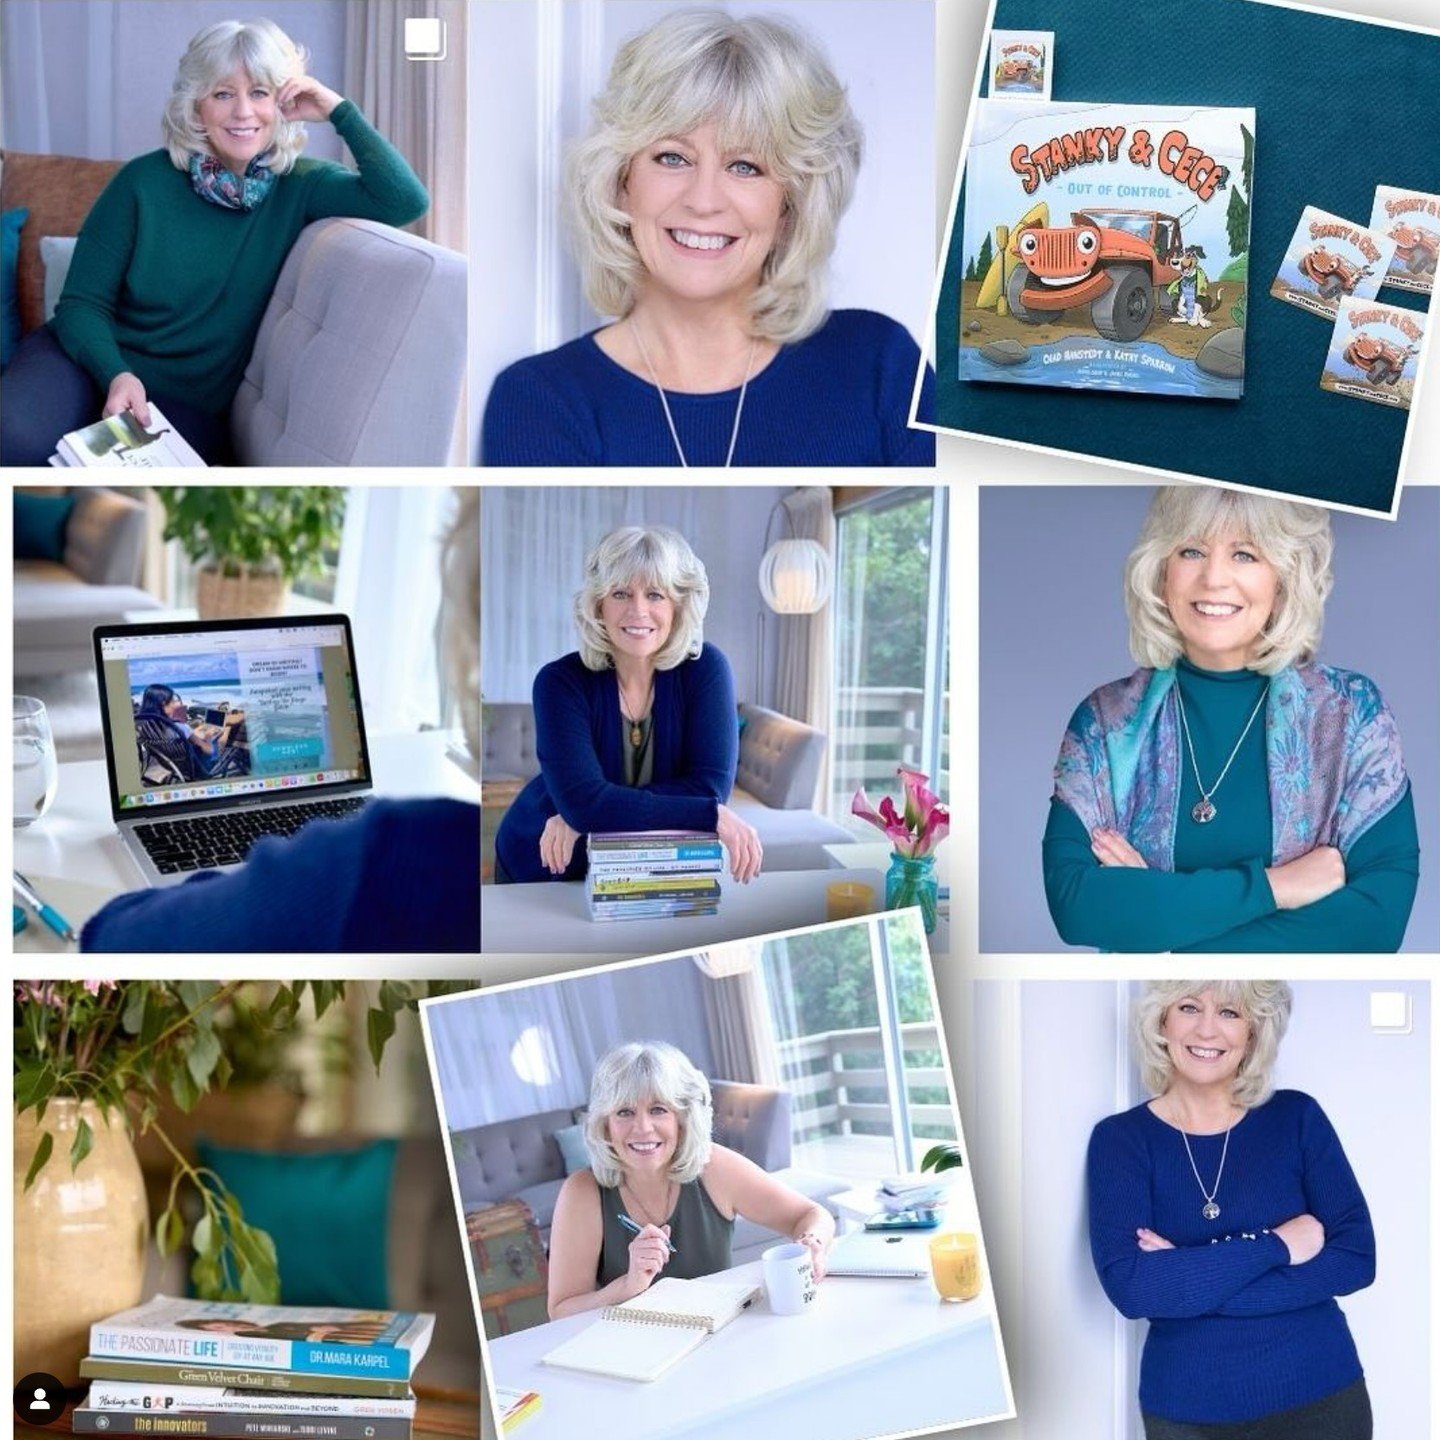 A wonderful collage of some of her branding photos from last month! Kathy is creating incredible forward motion in the literary field right now 🎉 &quot;kathysparrow23:
This is a long overdue post to give a huge shout-out of gratitude to Karen Floyd 